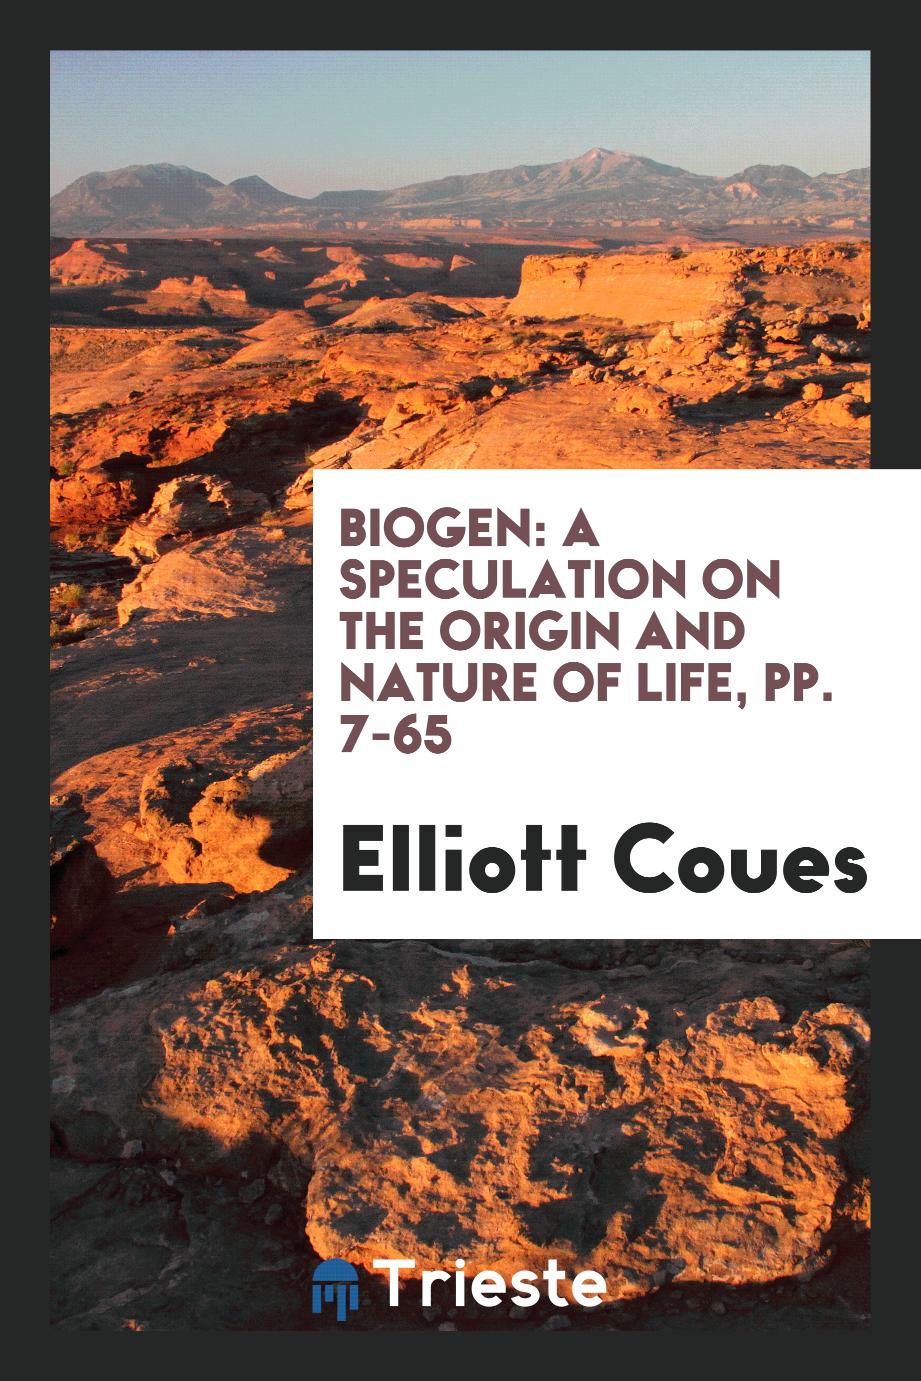 Biogen: A Speculation on the Origin and Nature of Life, pp. 7-65